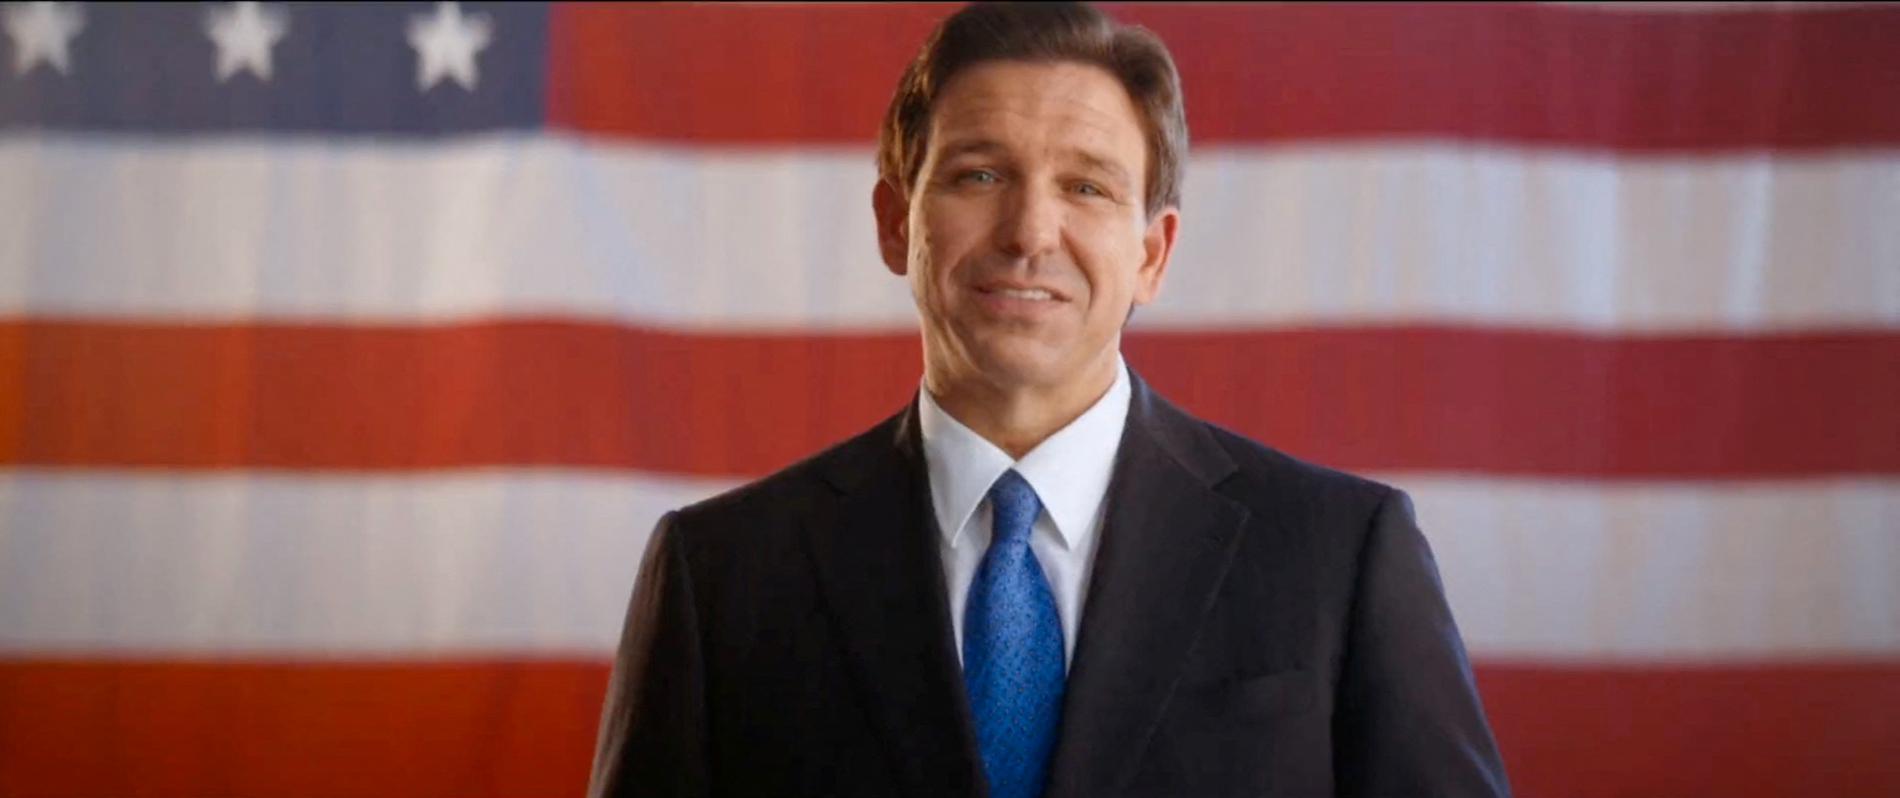 The Twitter issue for Ron DeSantis on his first appearance as a presidential candidate